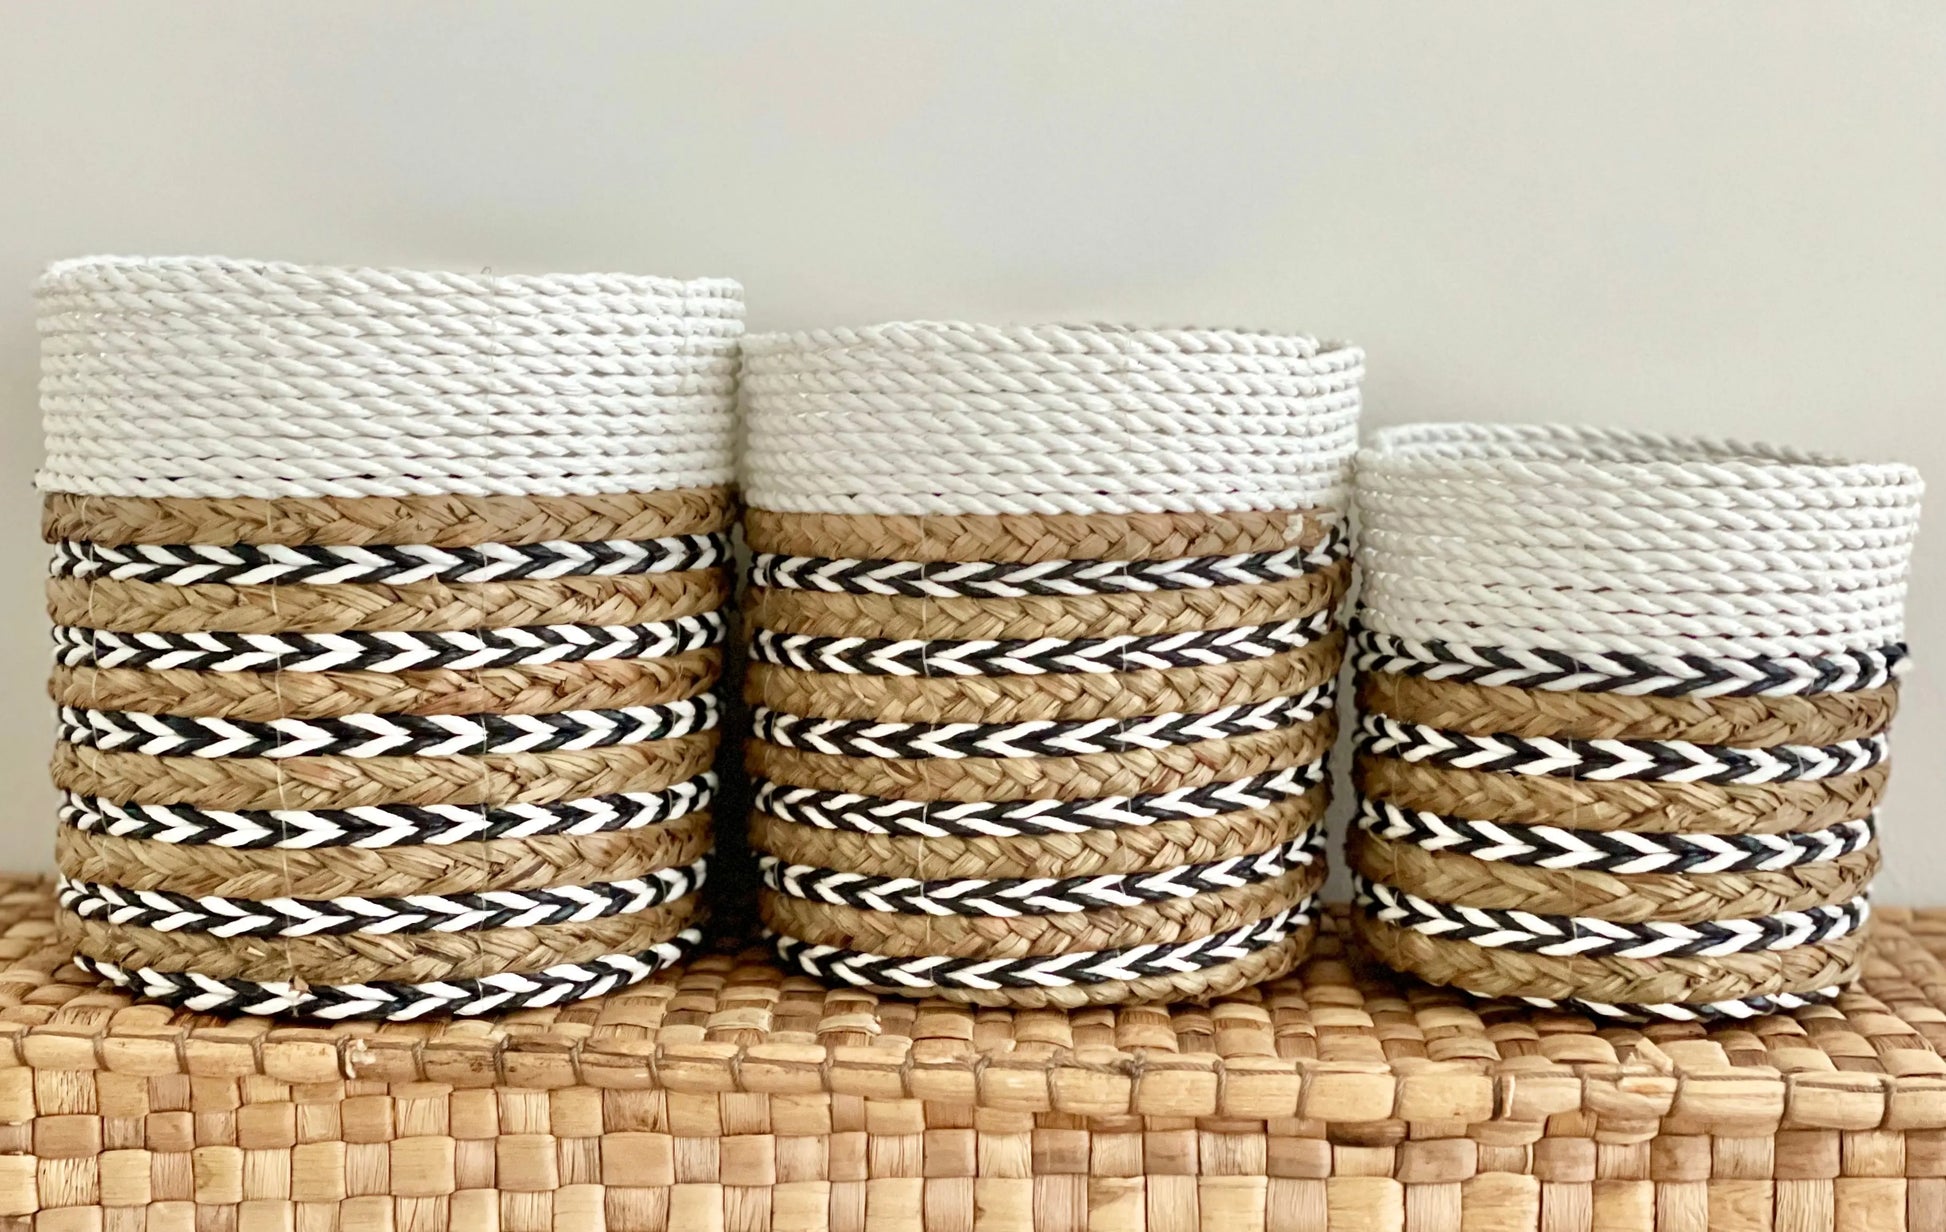 Woven Seagrass Pot Plant Holders Suksma from Bali